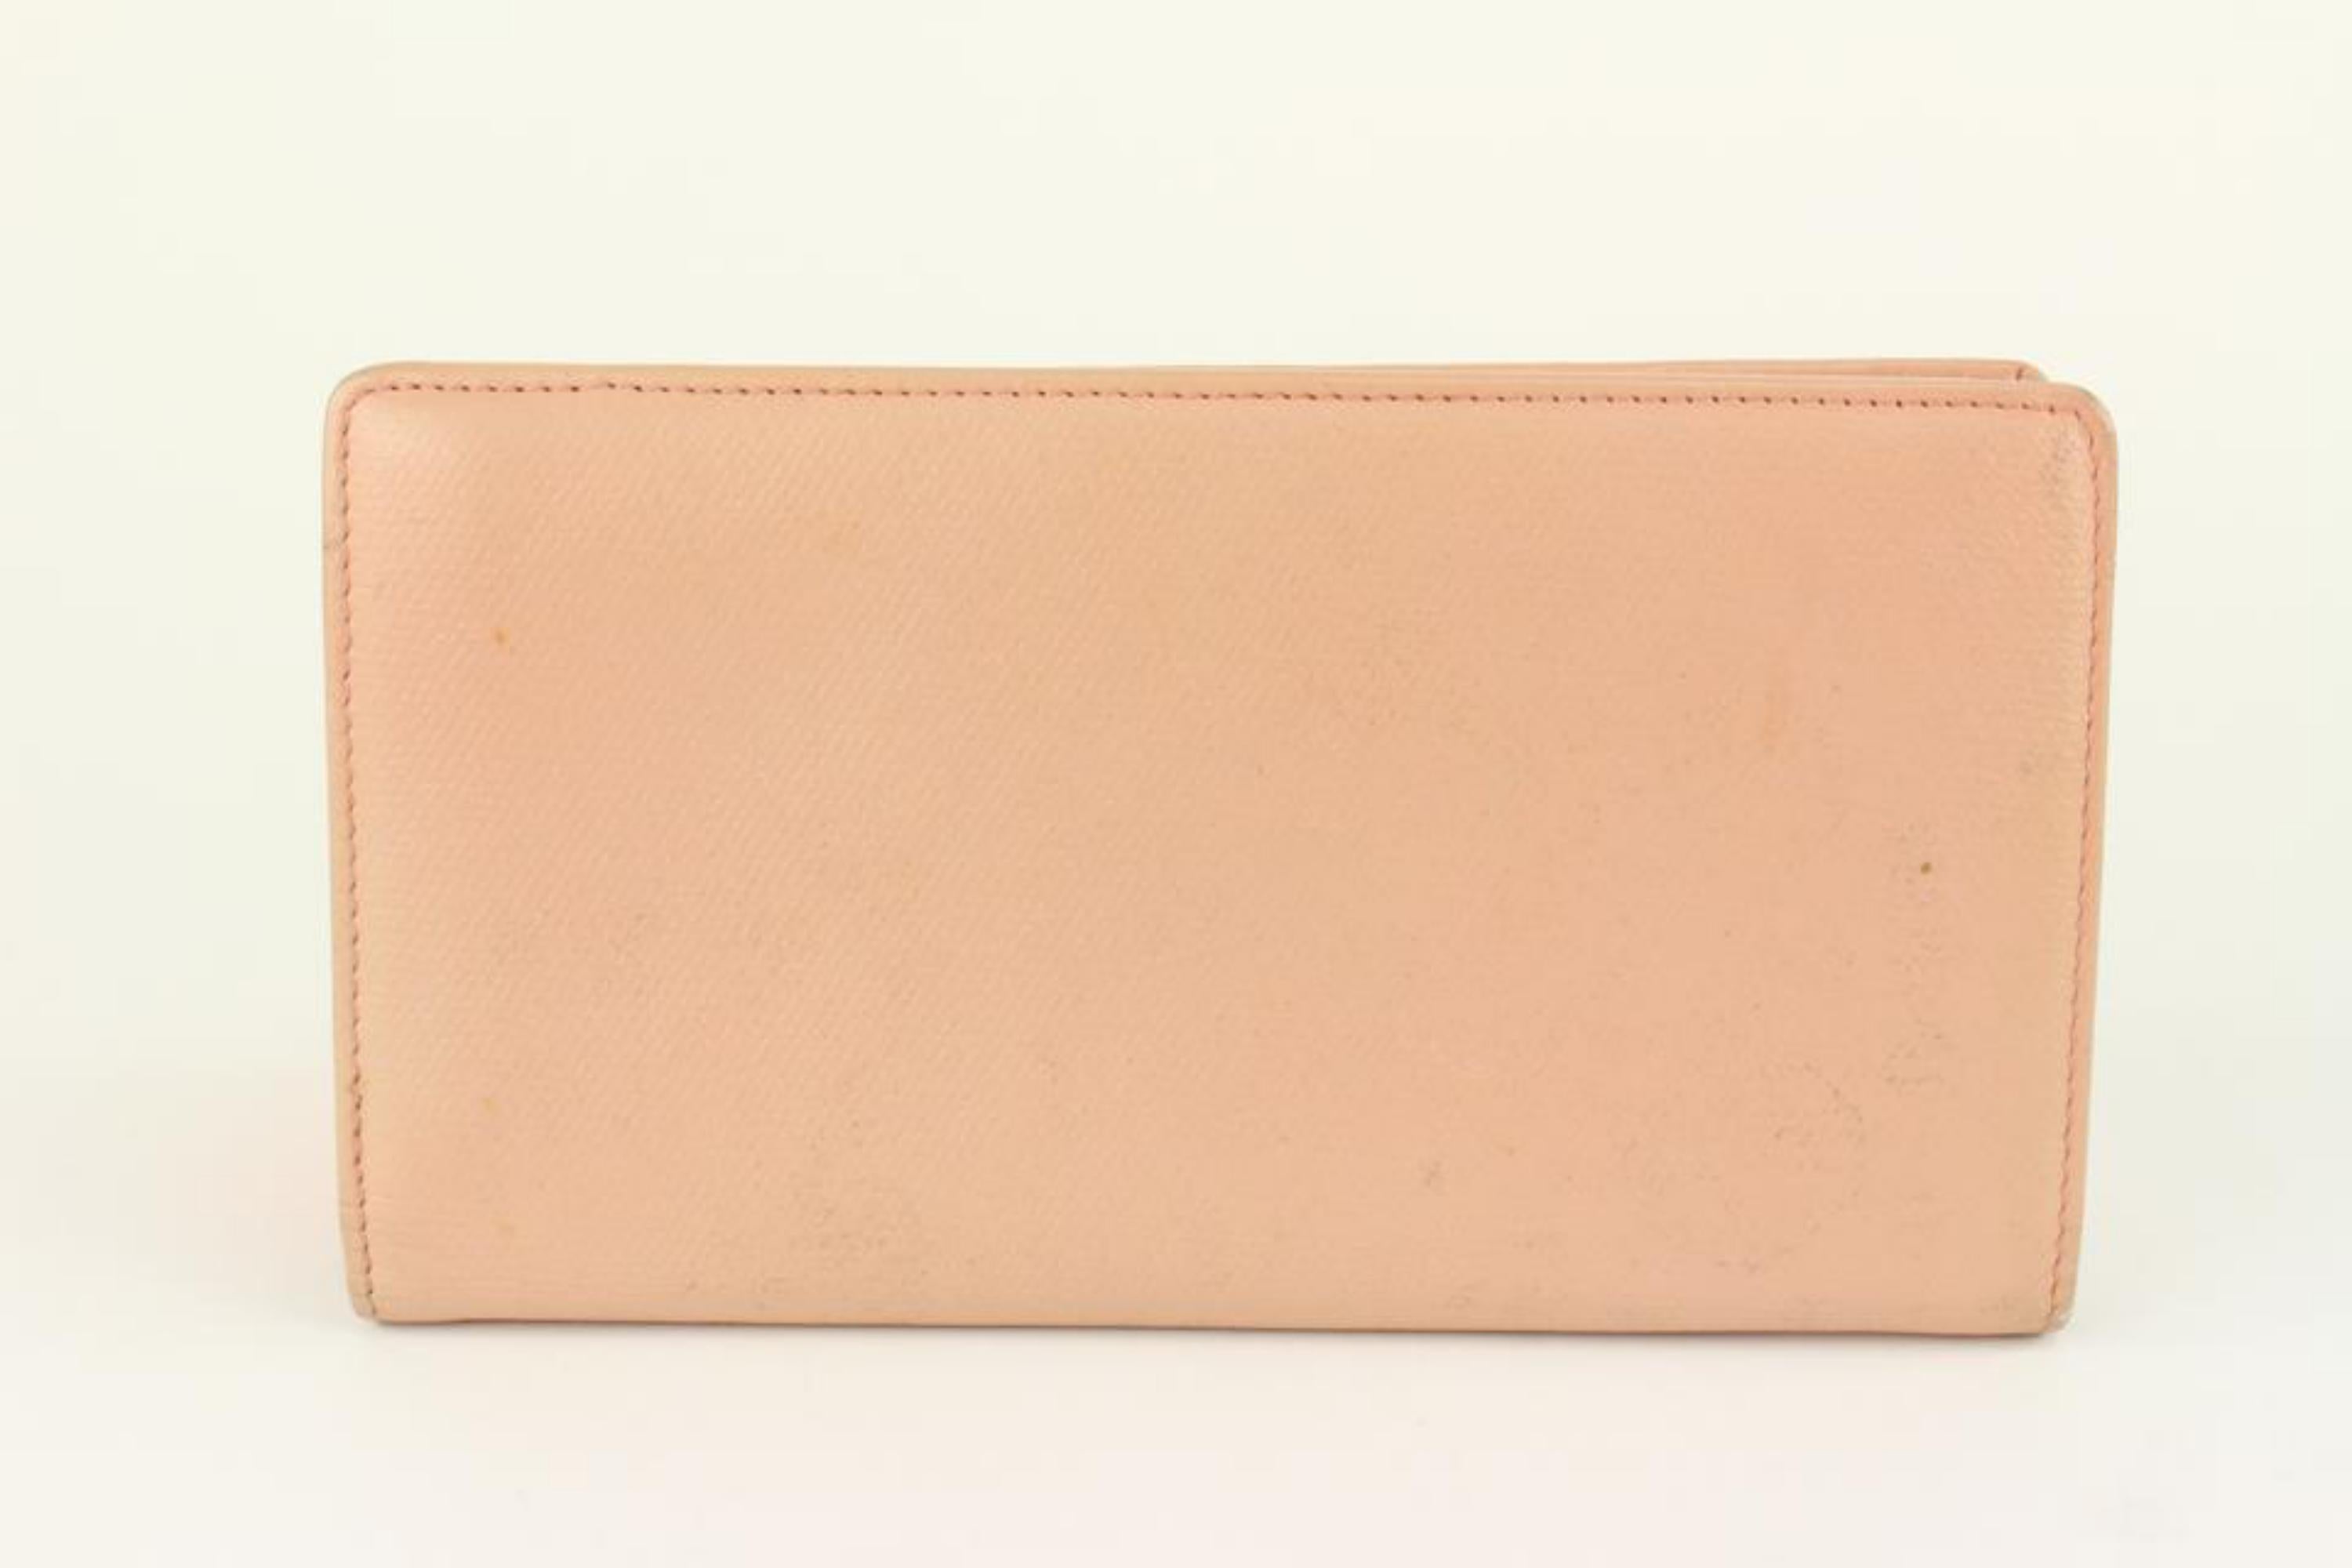 Chanel Pink Calfskin Leather Button Line CC Logo Long Wallet 122c1 For Sale 1